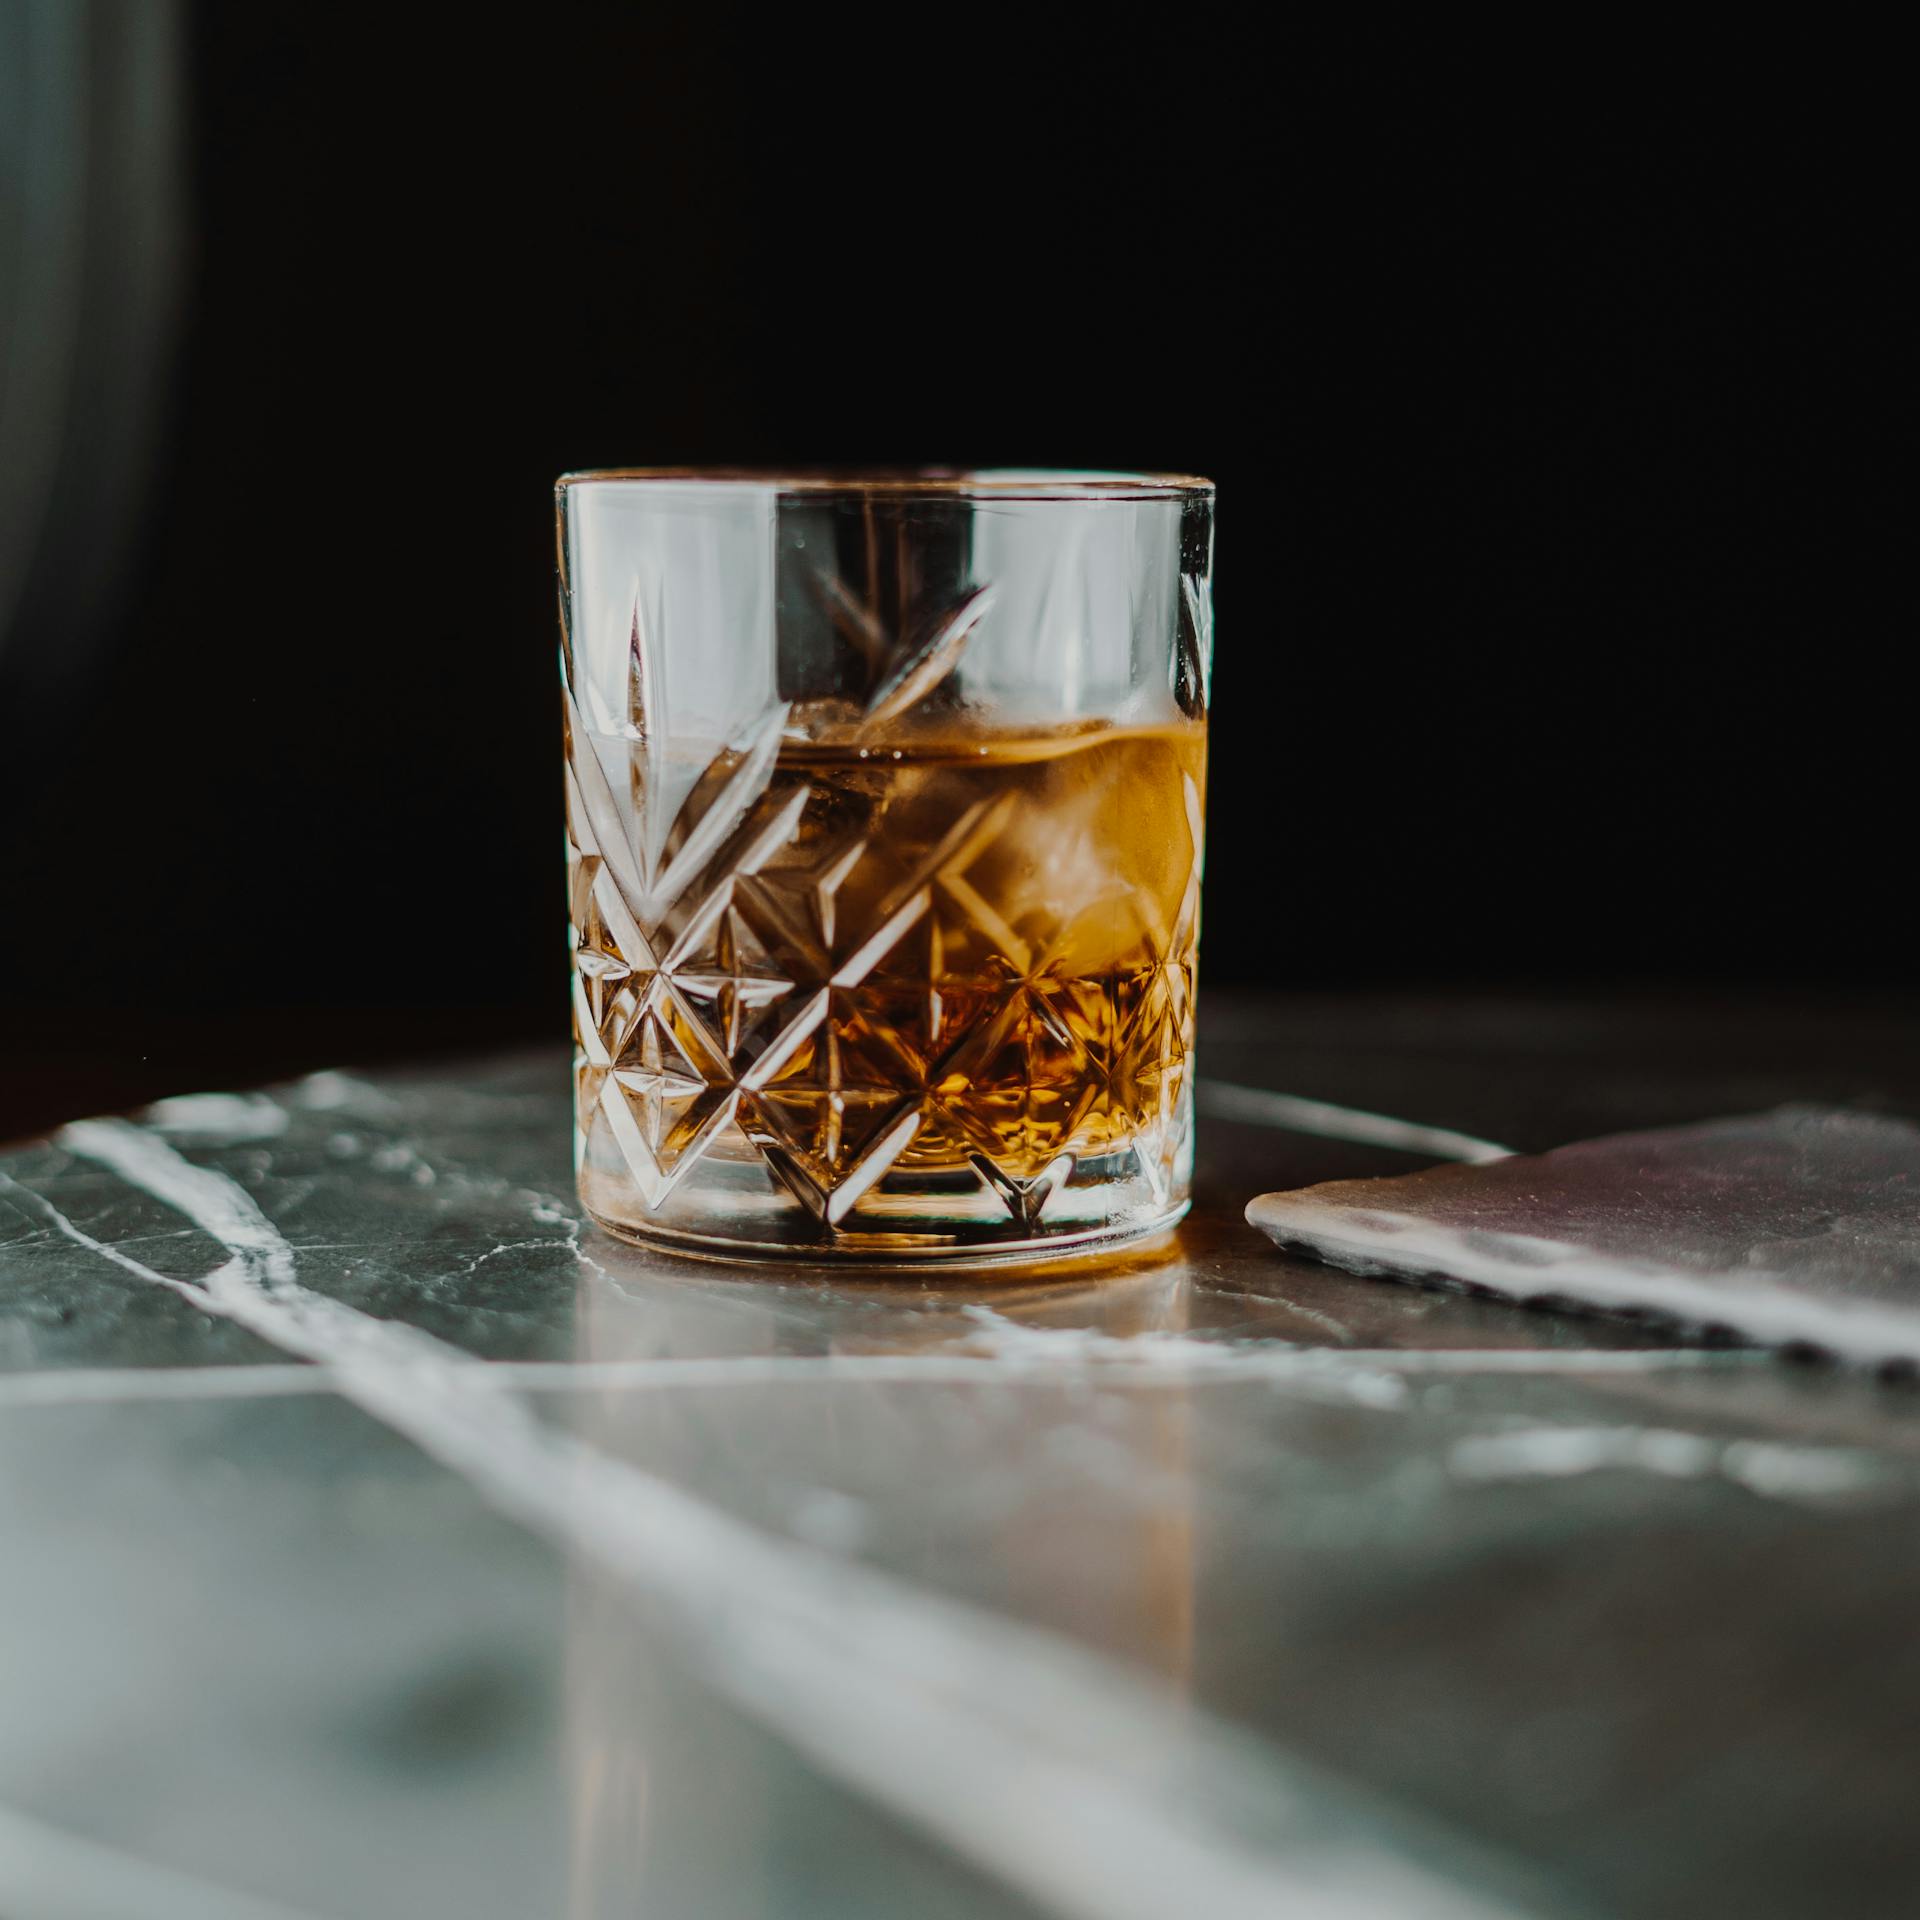 A glass of whiskey | Source: Pexels